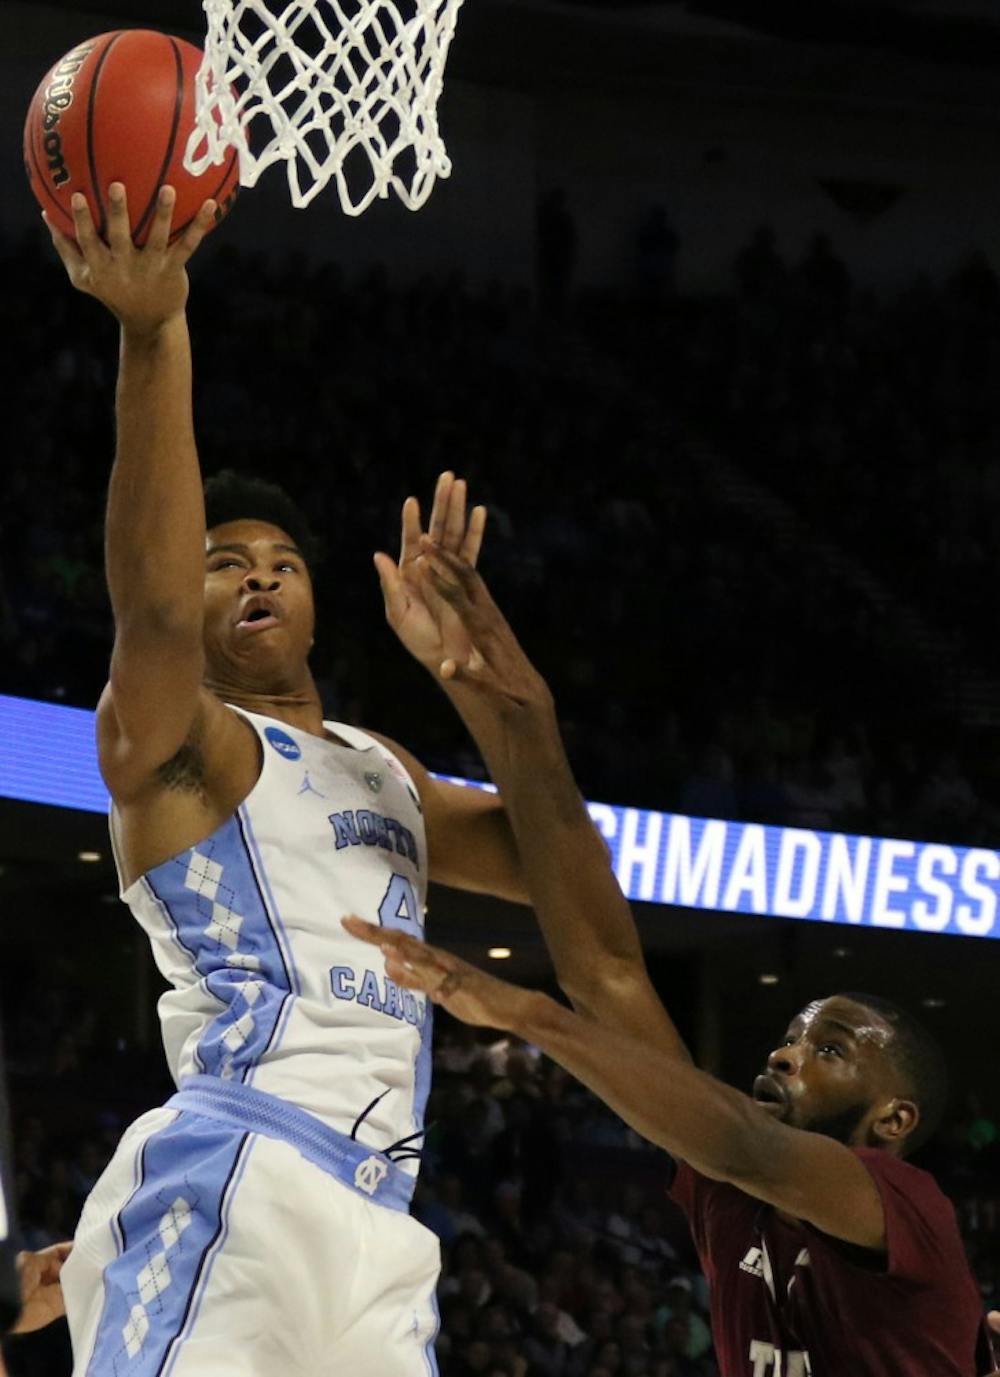 North Carolina forward Isaiah Hicks (4) rises for a lay in against Texas Southern in the first round of the NCAA Tournament in Greenville on Friday.